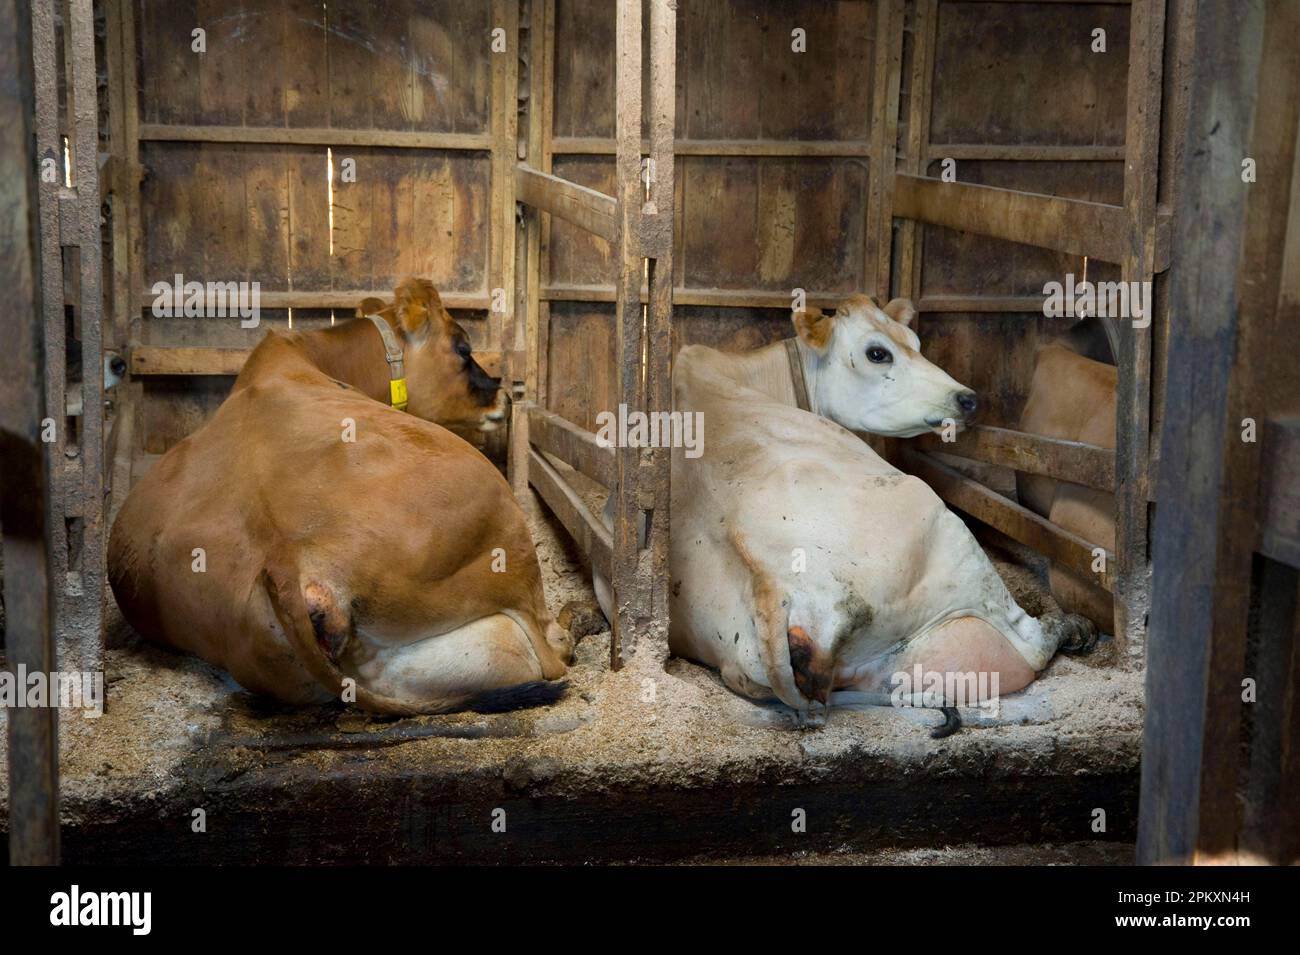 https://c8.alamy.com/comp/2PKXN4H/domestic-cattle-jersey-cows-resting-in-wooden-cubicle-pens-england-great-britain-2PKXN4H.jpg